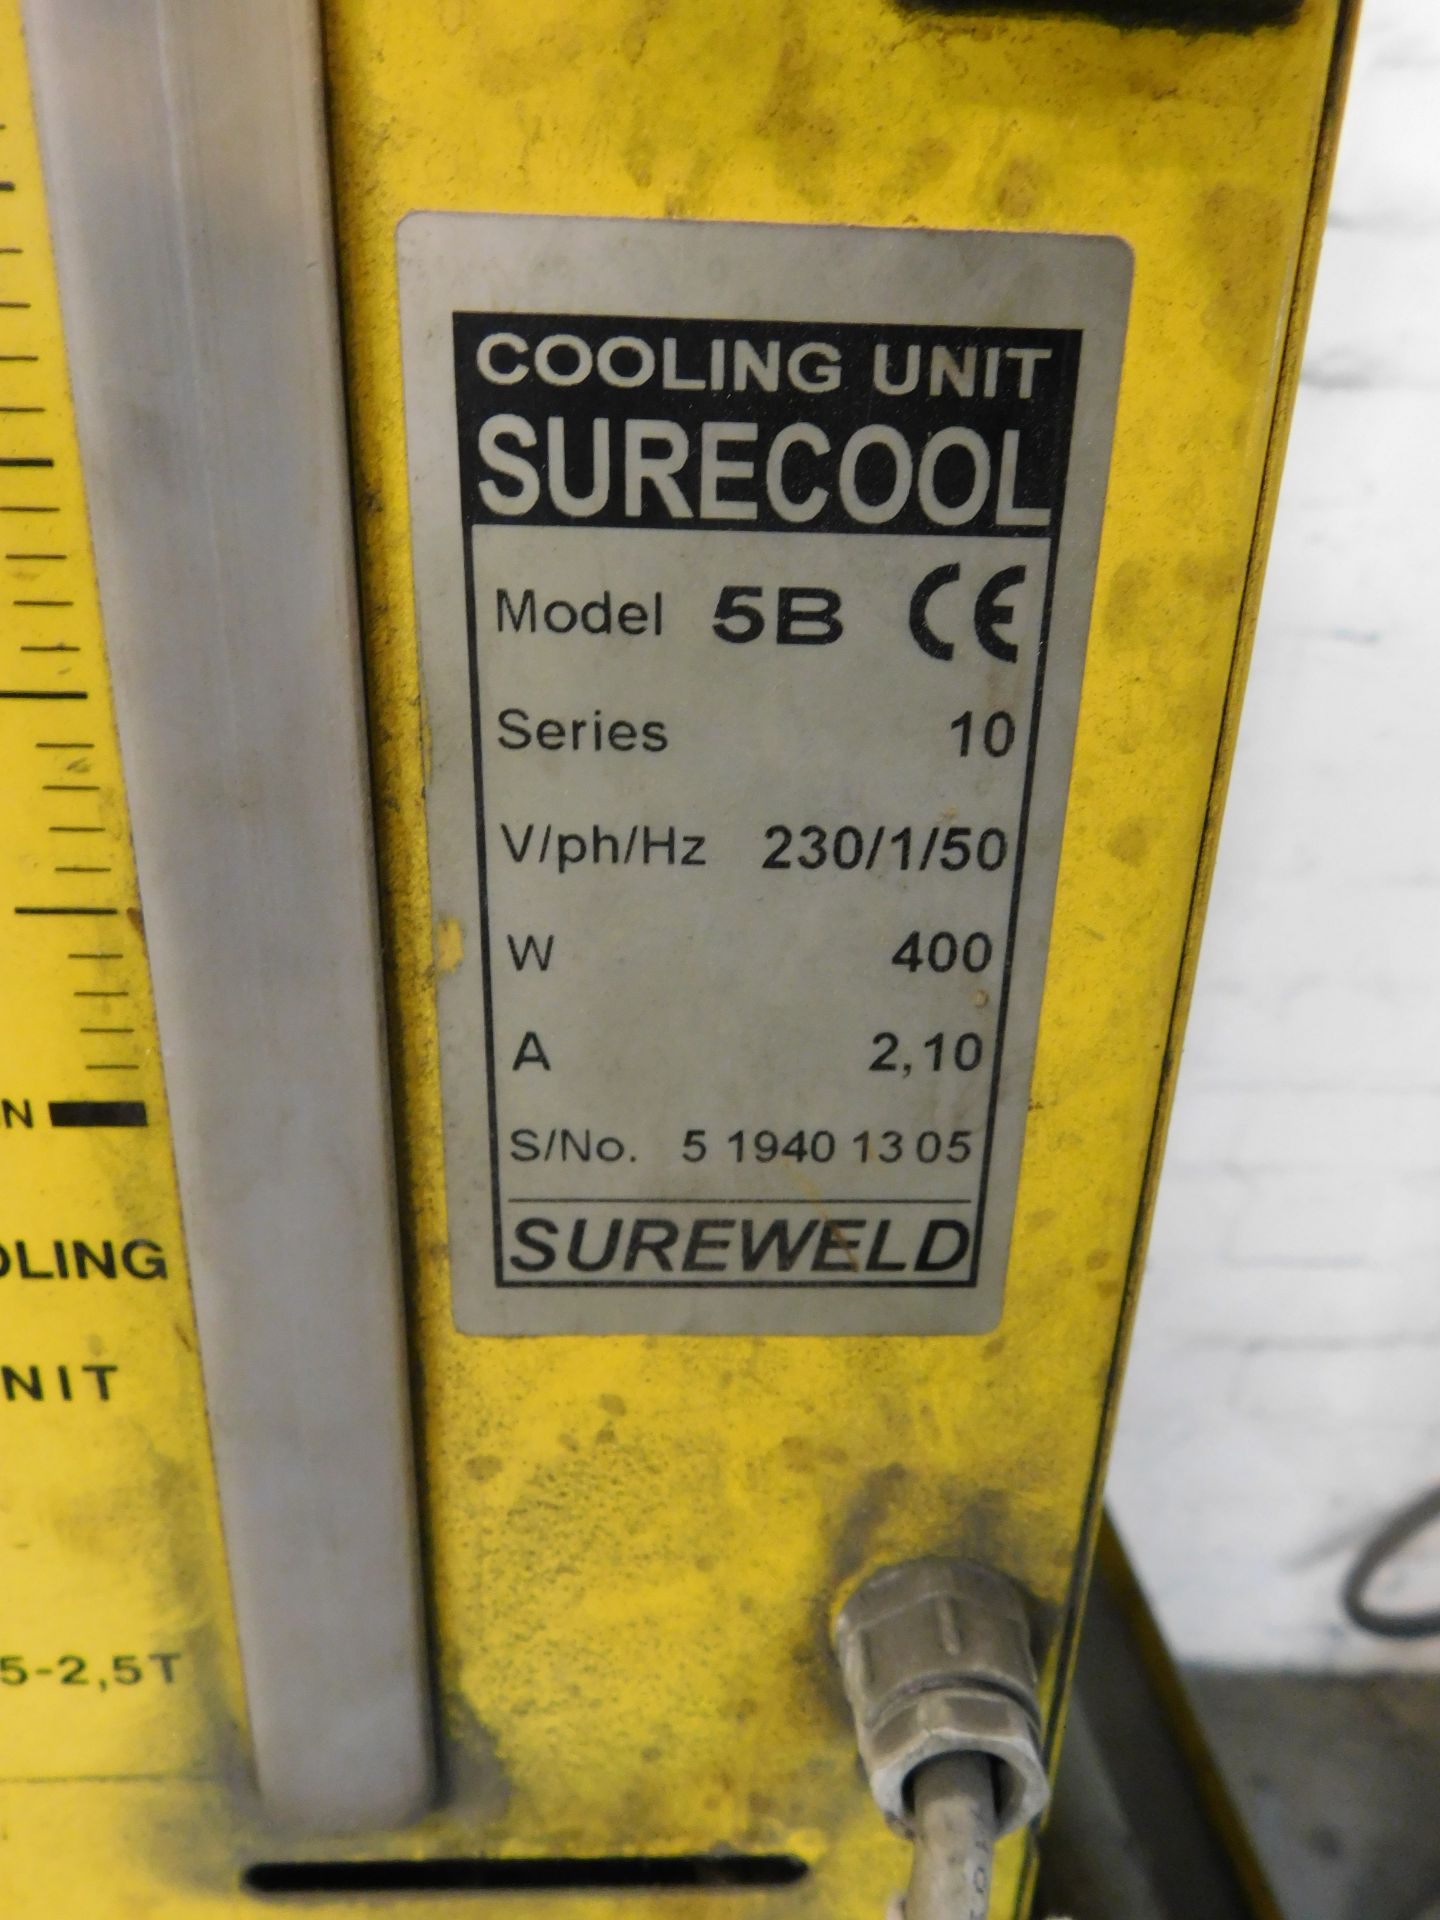 Lecco Type ZP 26 Spot Welder, Serial Number IE318 003 with Sureweld Surecool Model 5B Cooling - Image 6 of 6